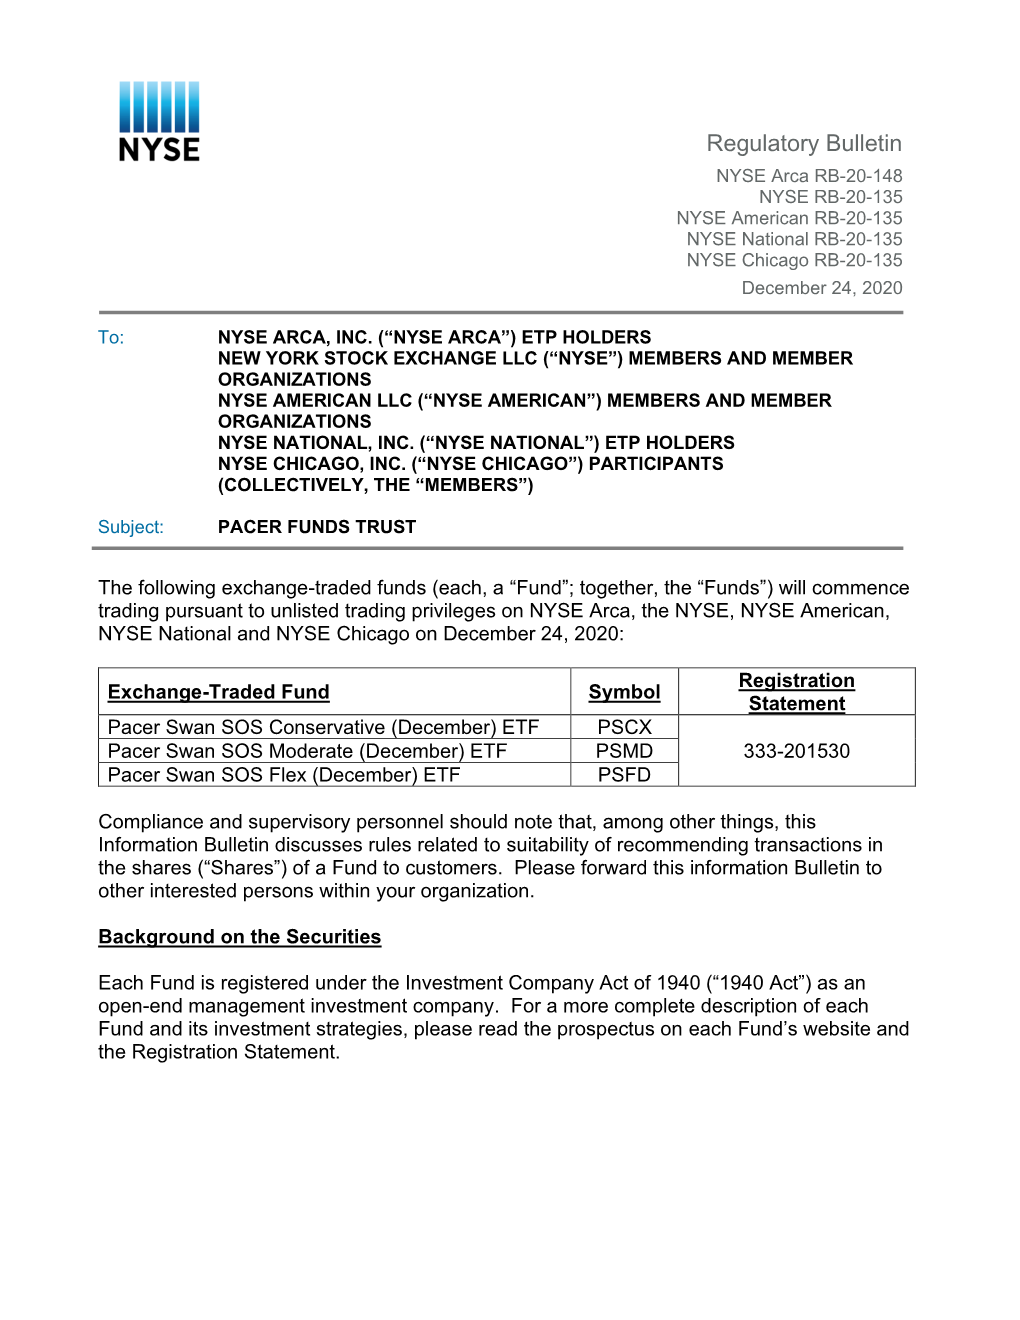 Regulatory Bulletin NYSE Arca RB-20-148 NYSE RB-20-135 NYSE American RB-20-135 NYSE National RB-20-135 NYSE Chicago RB-20-135 December 24, 2020